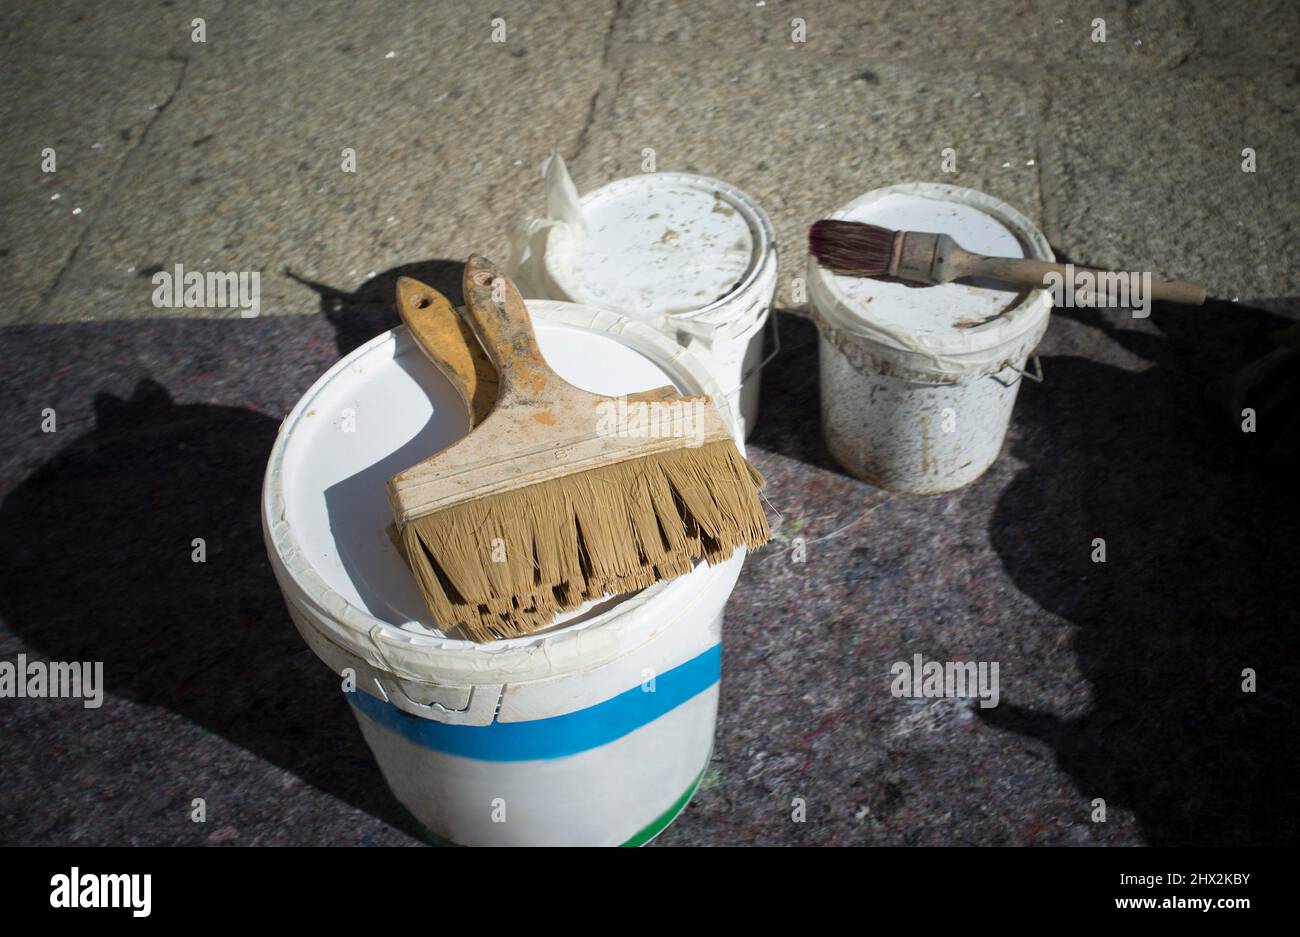 Painter brushes over buckets. Stone granite floor protected with blanket. Stock Photo